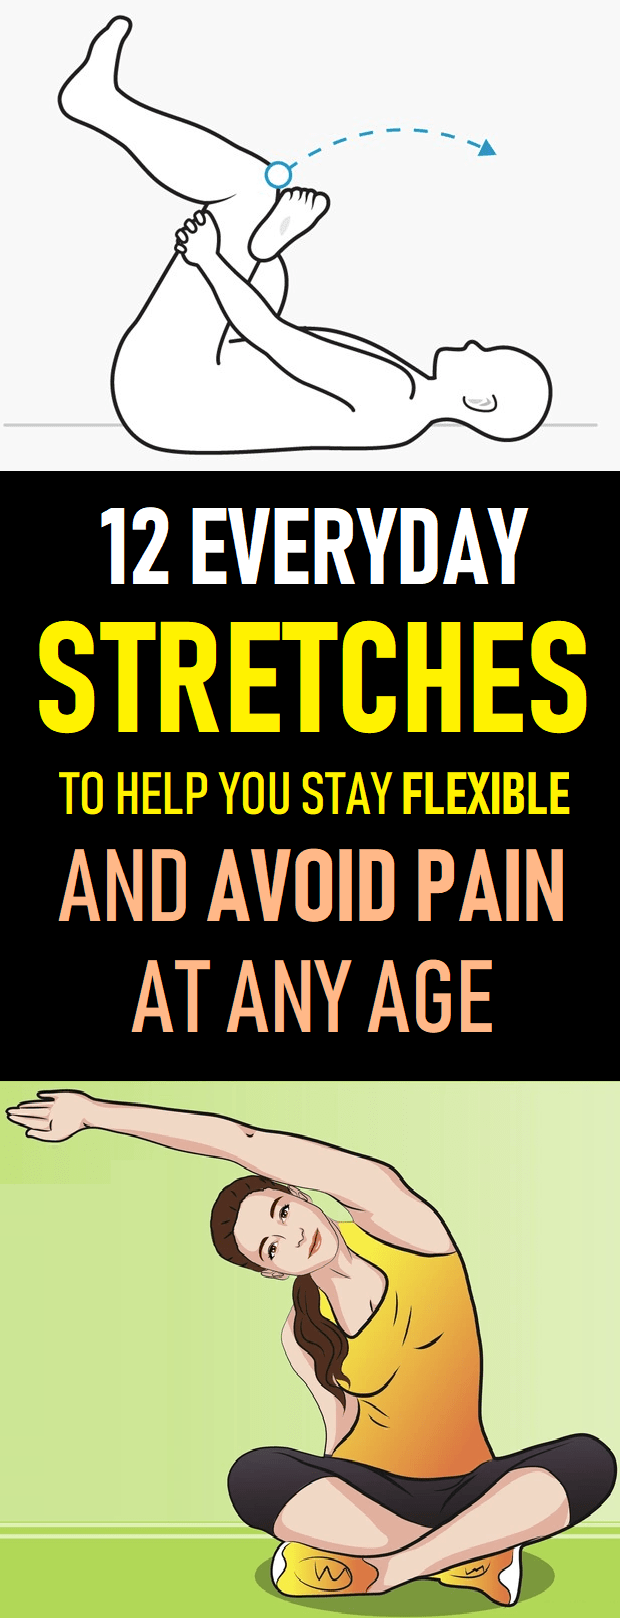 12 Everyday Stretches to Help You Stay Flexible and Avoid Pain at Any Age -   17 fitness design food
 ideas